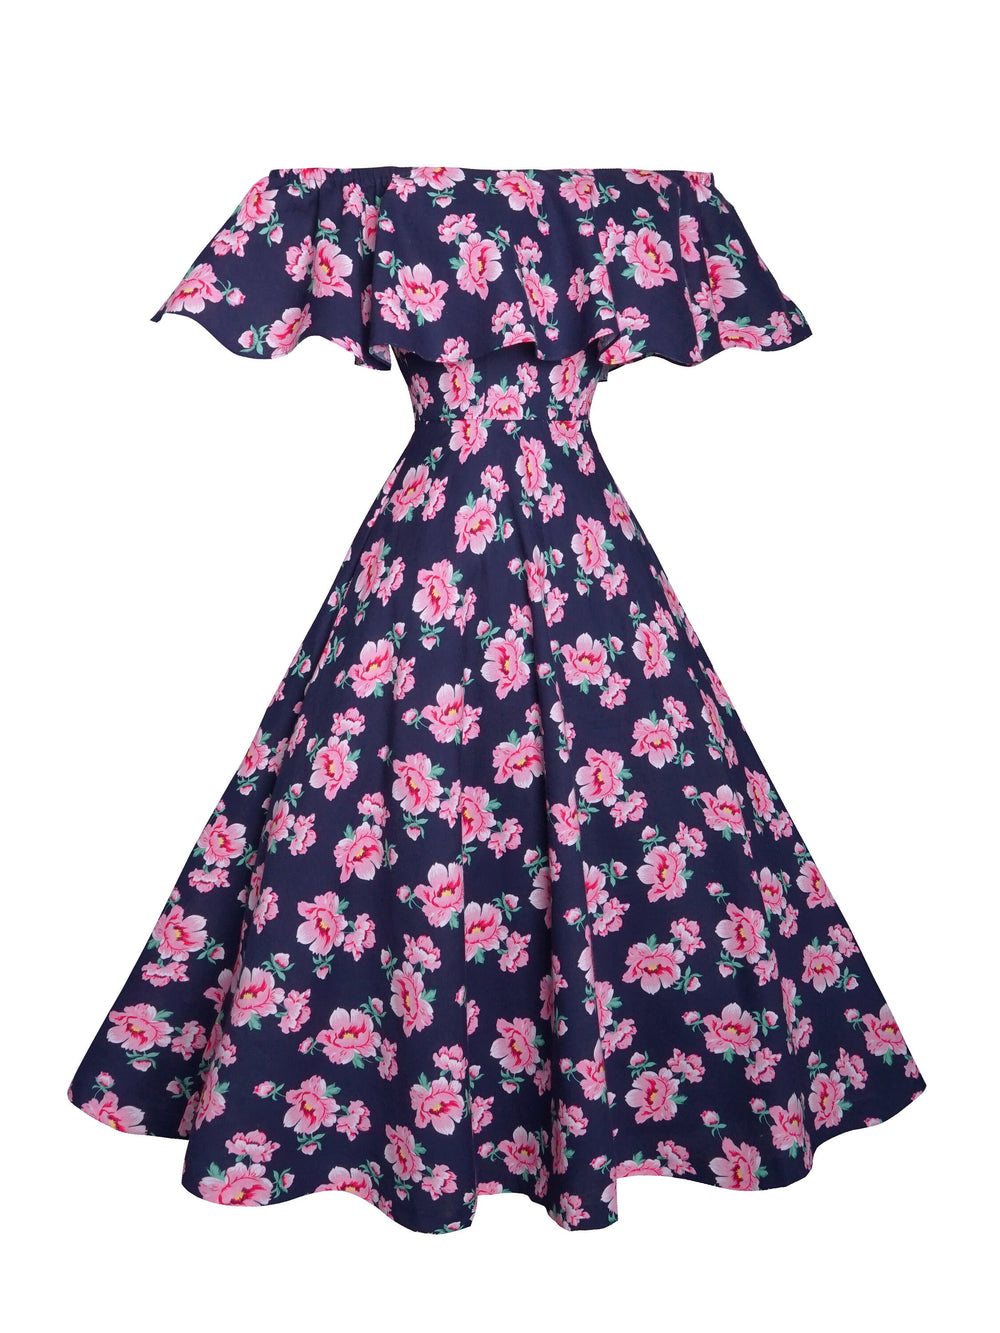 RTS - Size S - Dauphine Dress "Tokyo Rose"